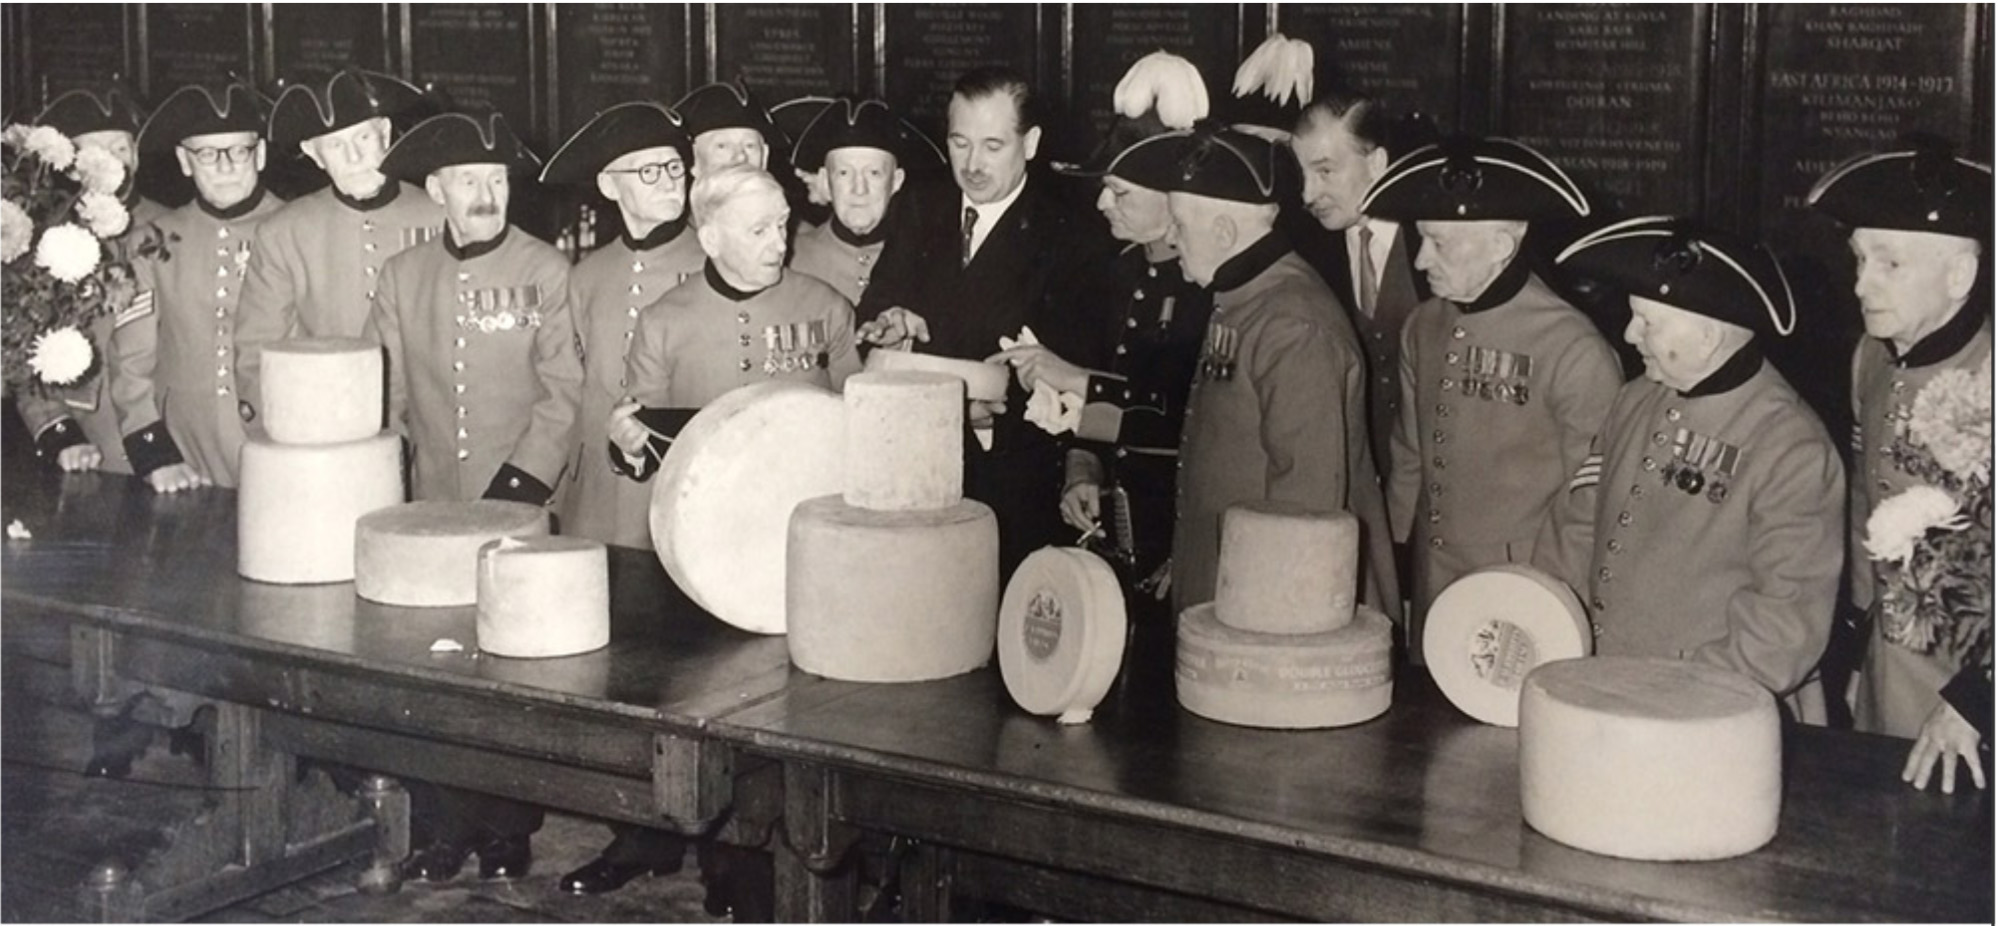 Historic cheese donations to the Royal Hospital dates back over 300 years